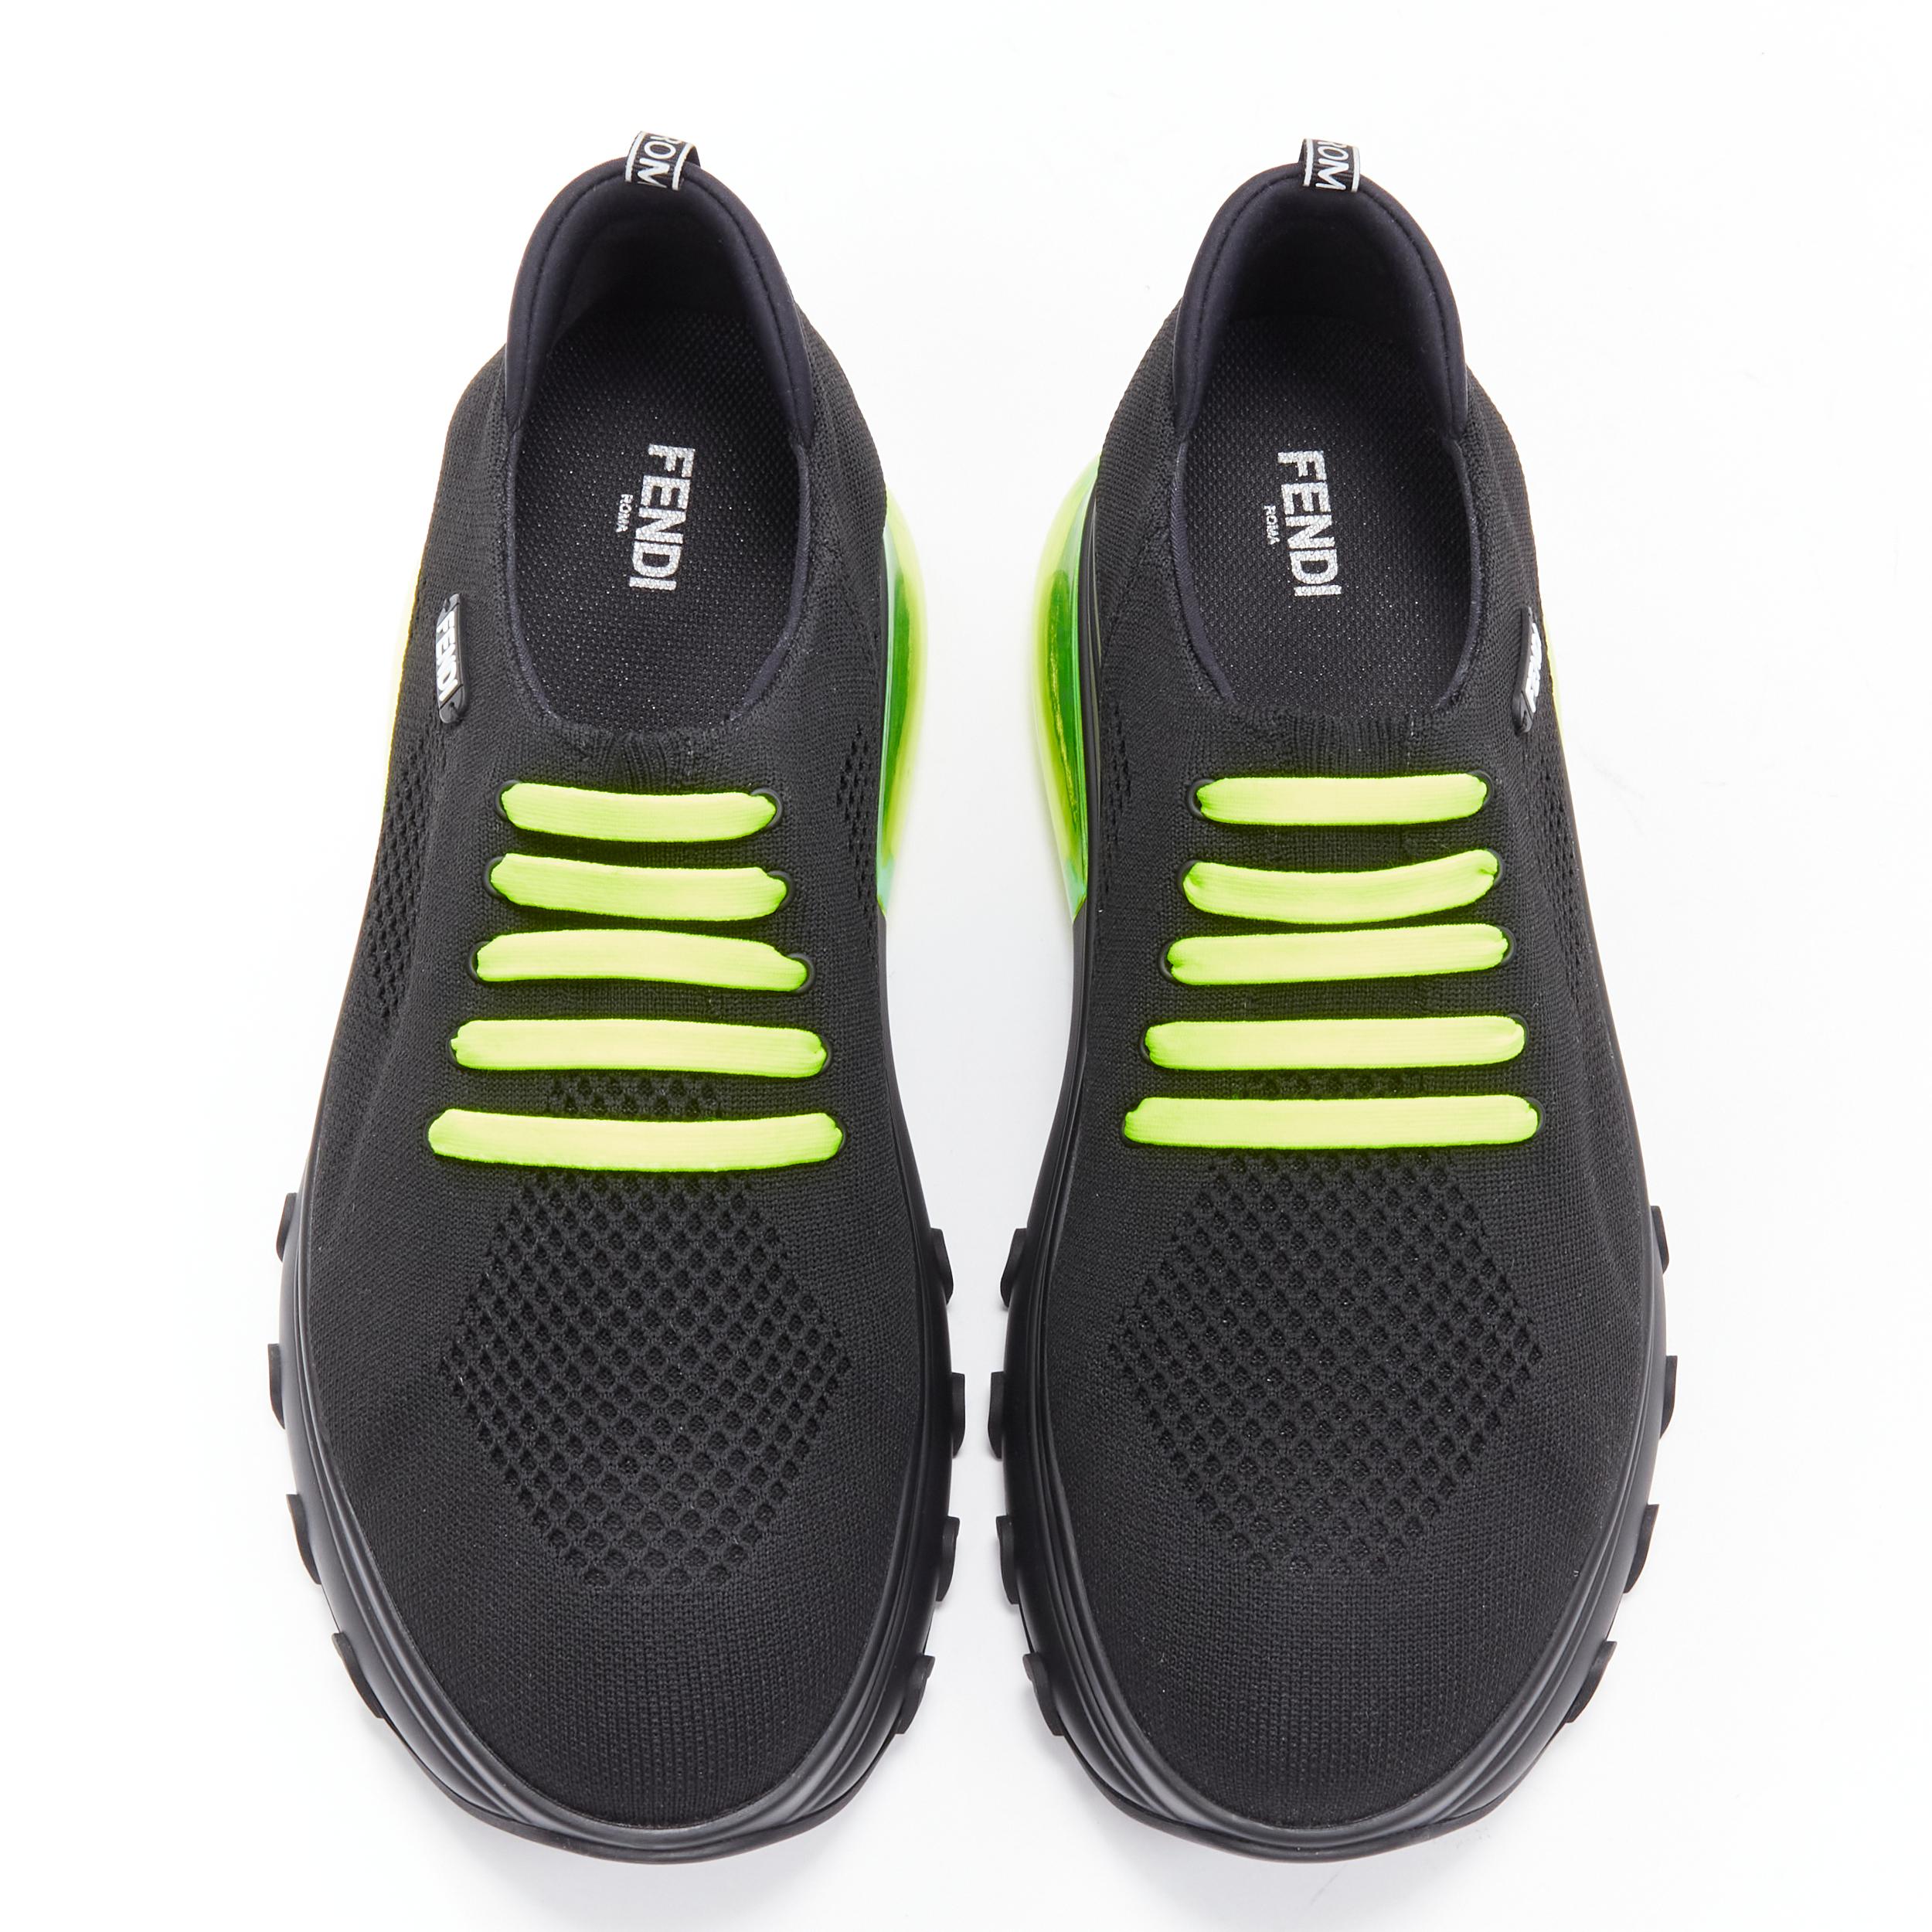 new FENDI 2019 black knit neon yellow air sole low runner sneaker 7E1234 EU44 
Reference: TGAS/B01591 
Brand: Fendi 
Model: Air sole sneaker 
Material: Fabric 
Color: Black 
Pattern: Solid 
Closure: Lace 
Extra Detail: Neon laces. Sock knit upper.